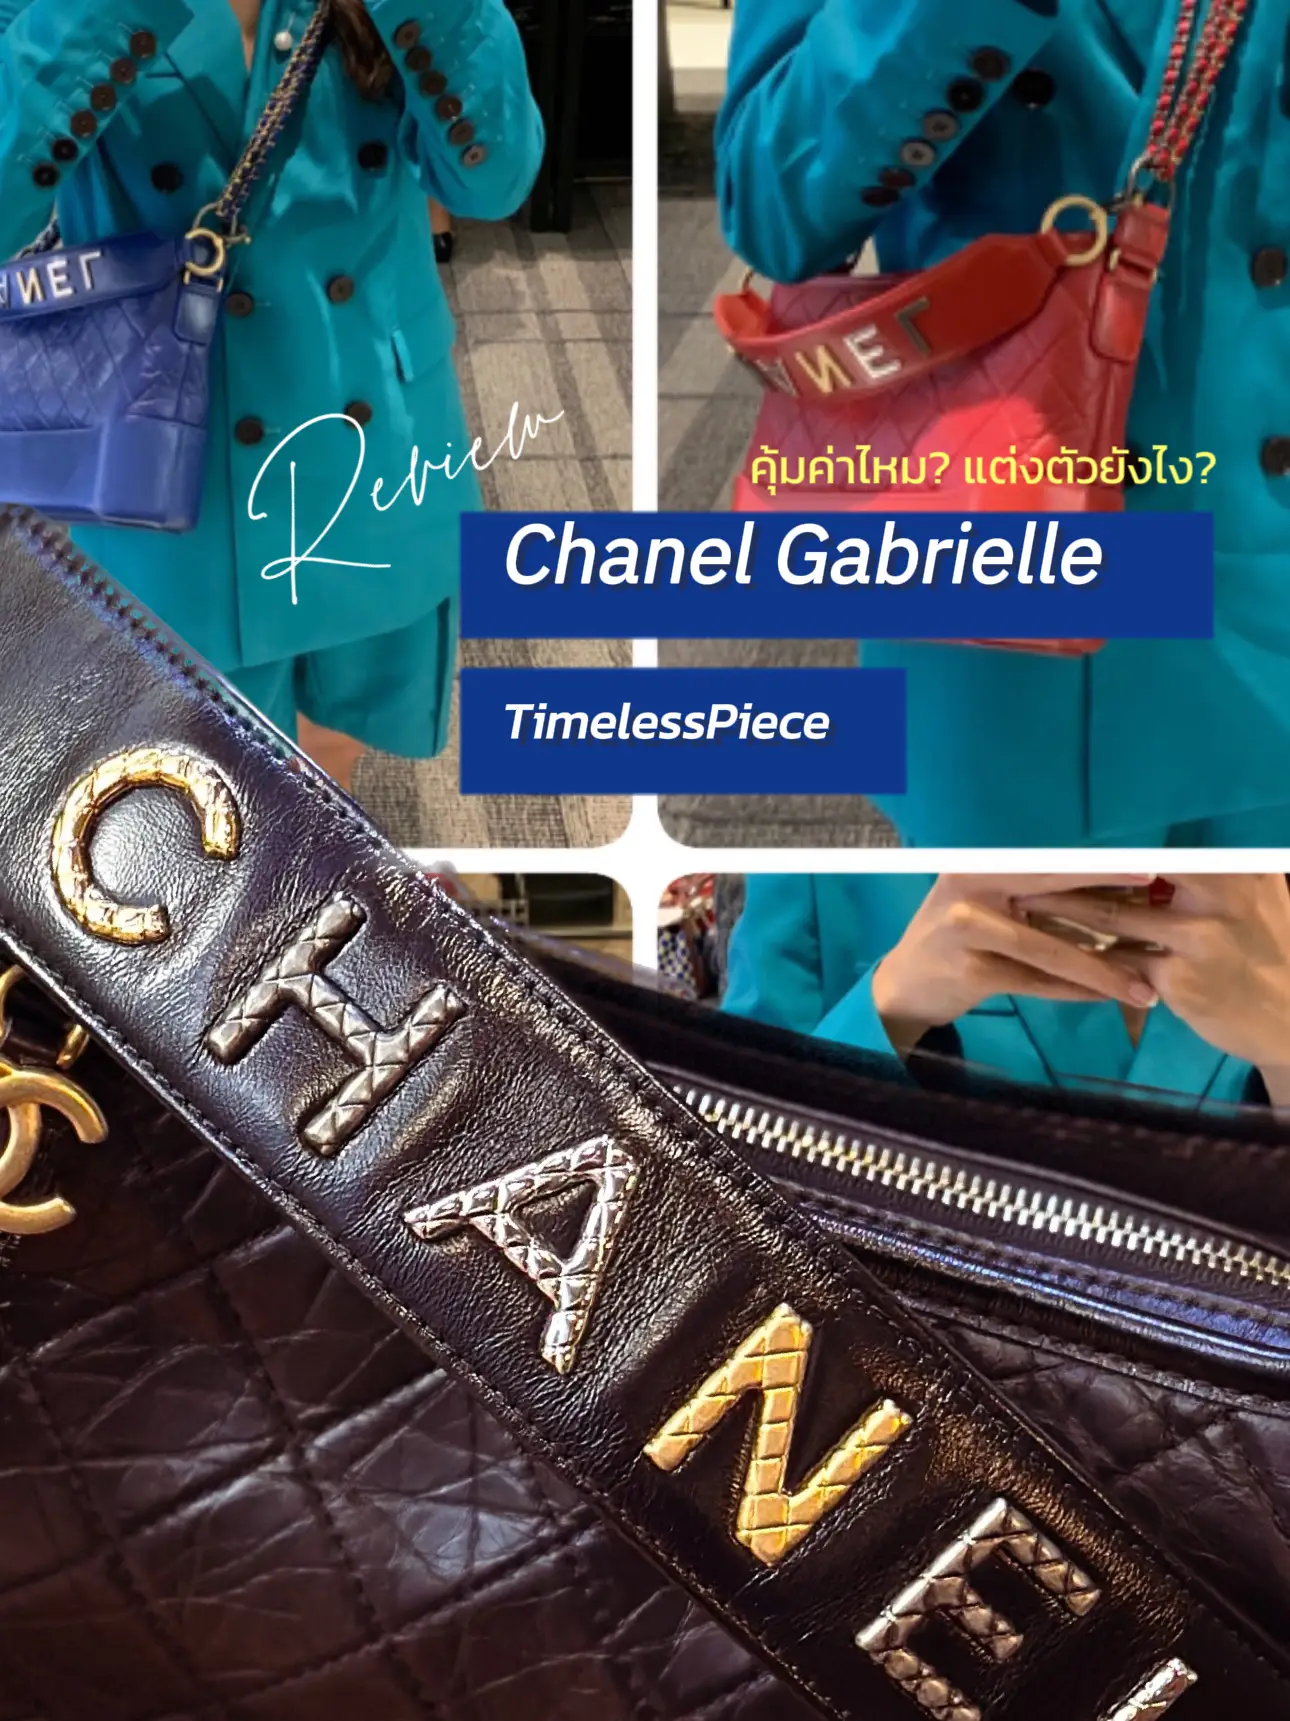 Is Chanel Gabrielle worth it? How to dress?, Gallery posted by Jun Imai